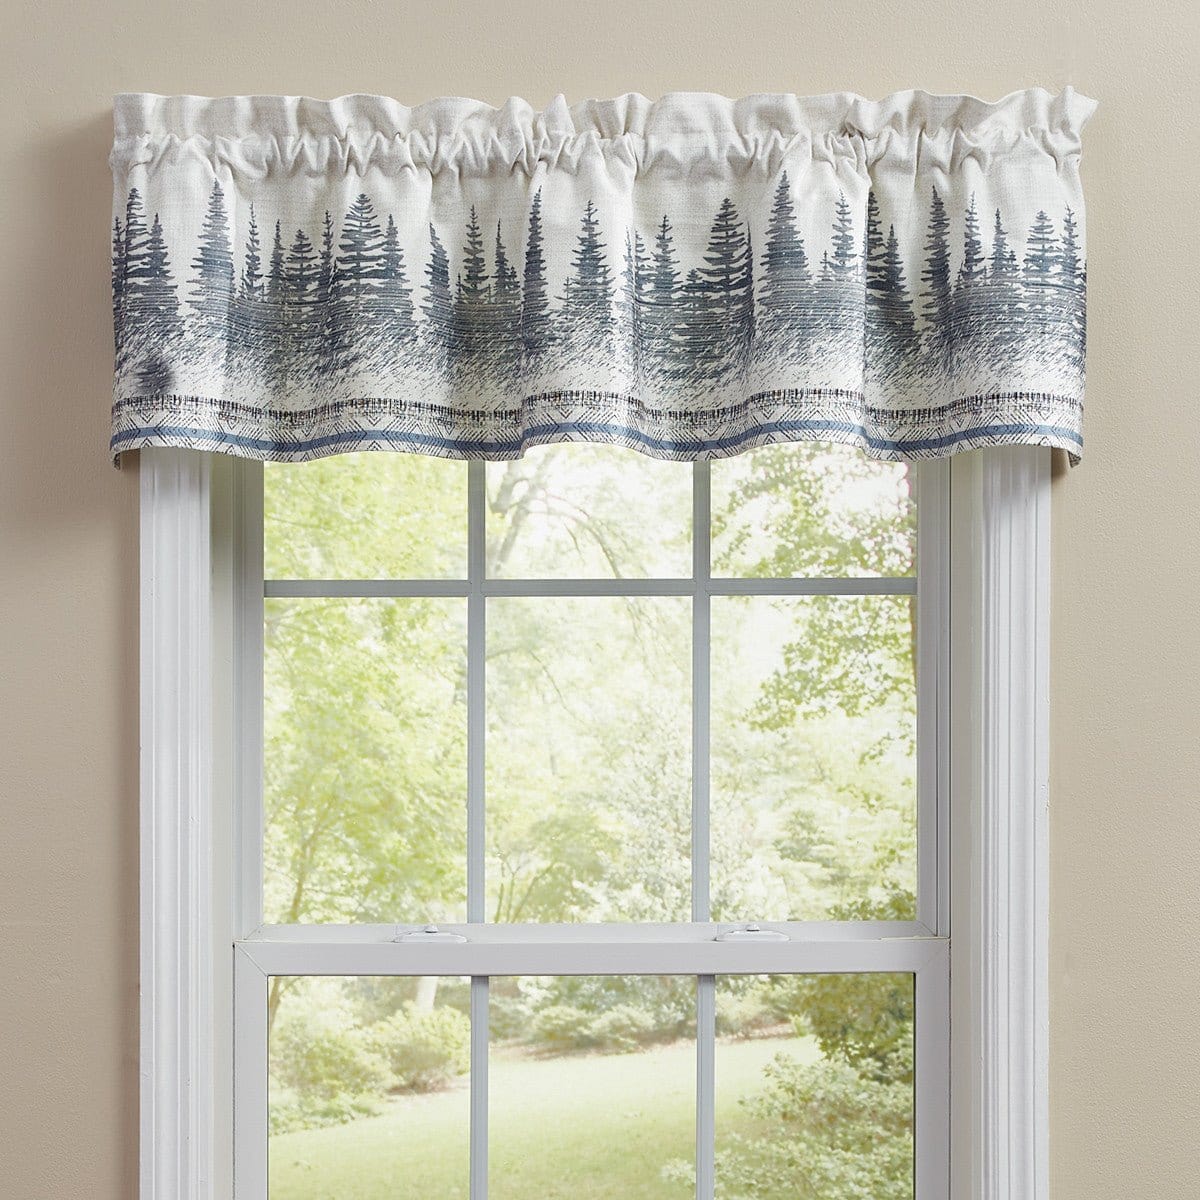 Into The Woods Printed Valance Unlined-Park Designs-The Village Merchant